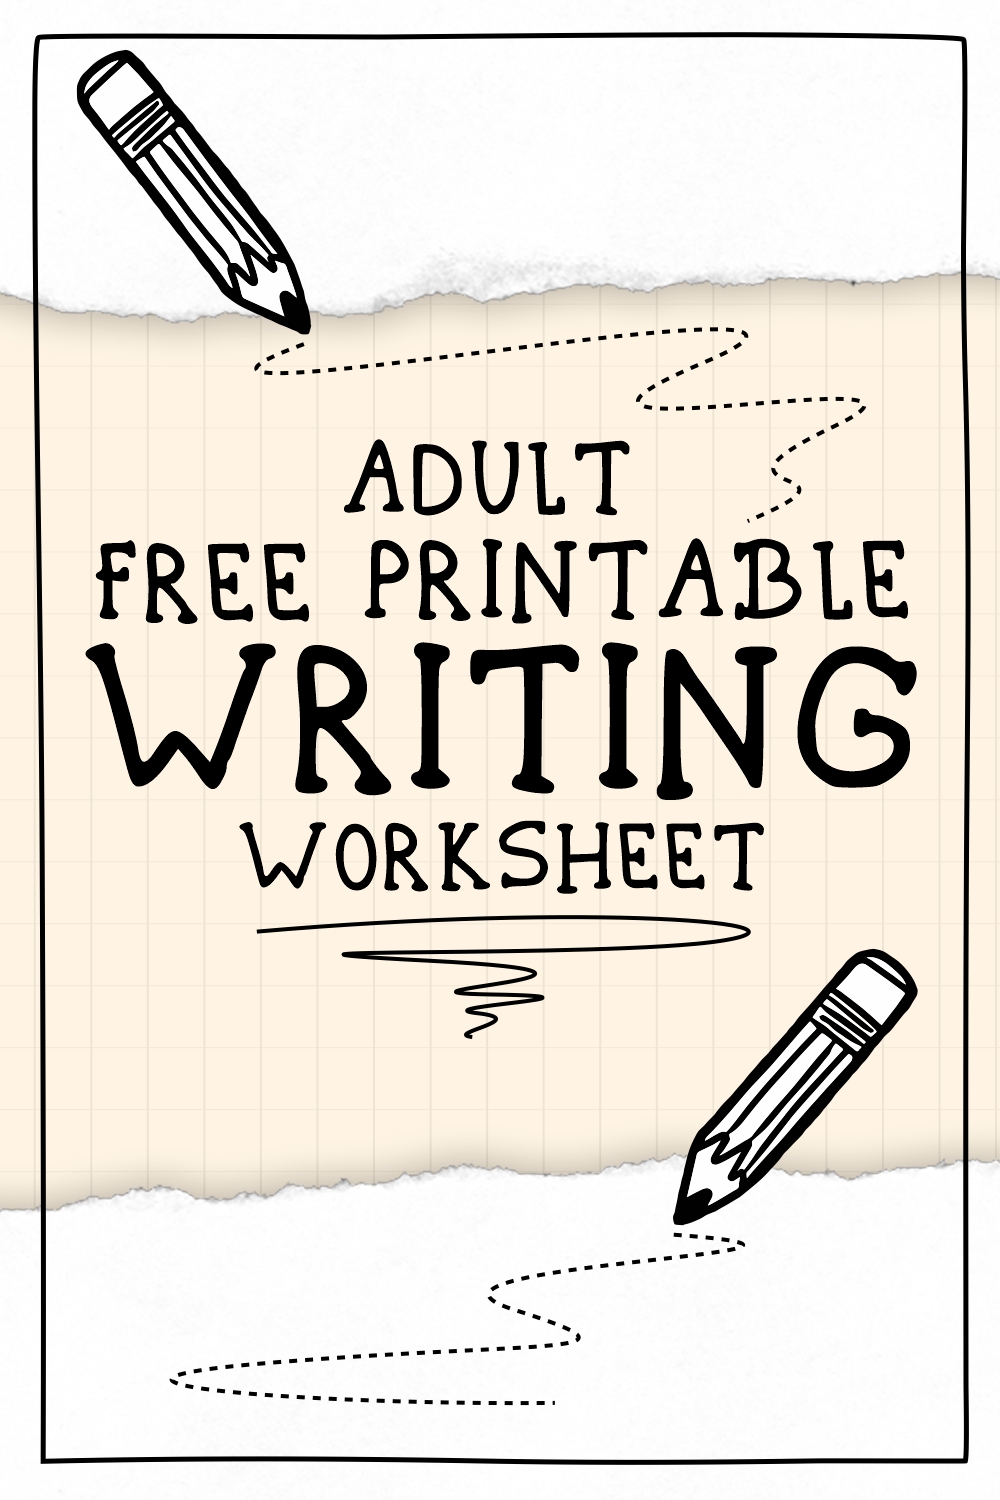 16 Images of Adult  Printable Writing Worksheets